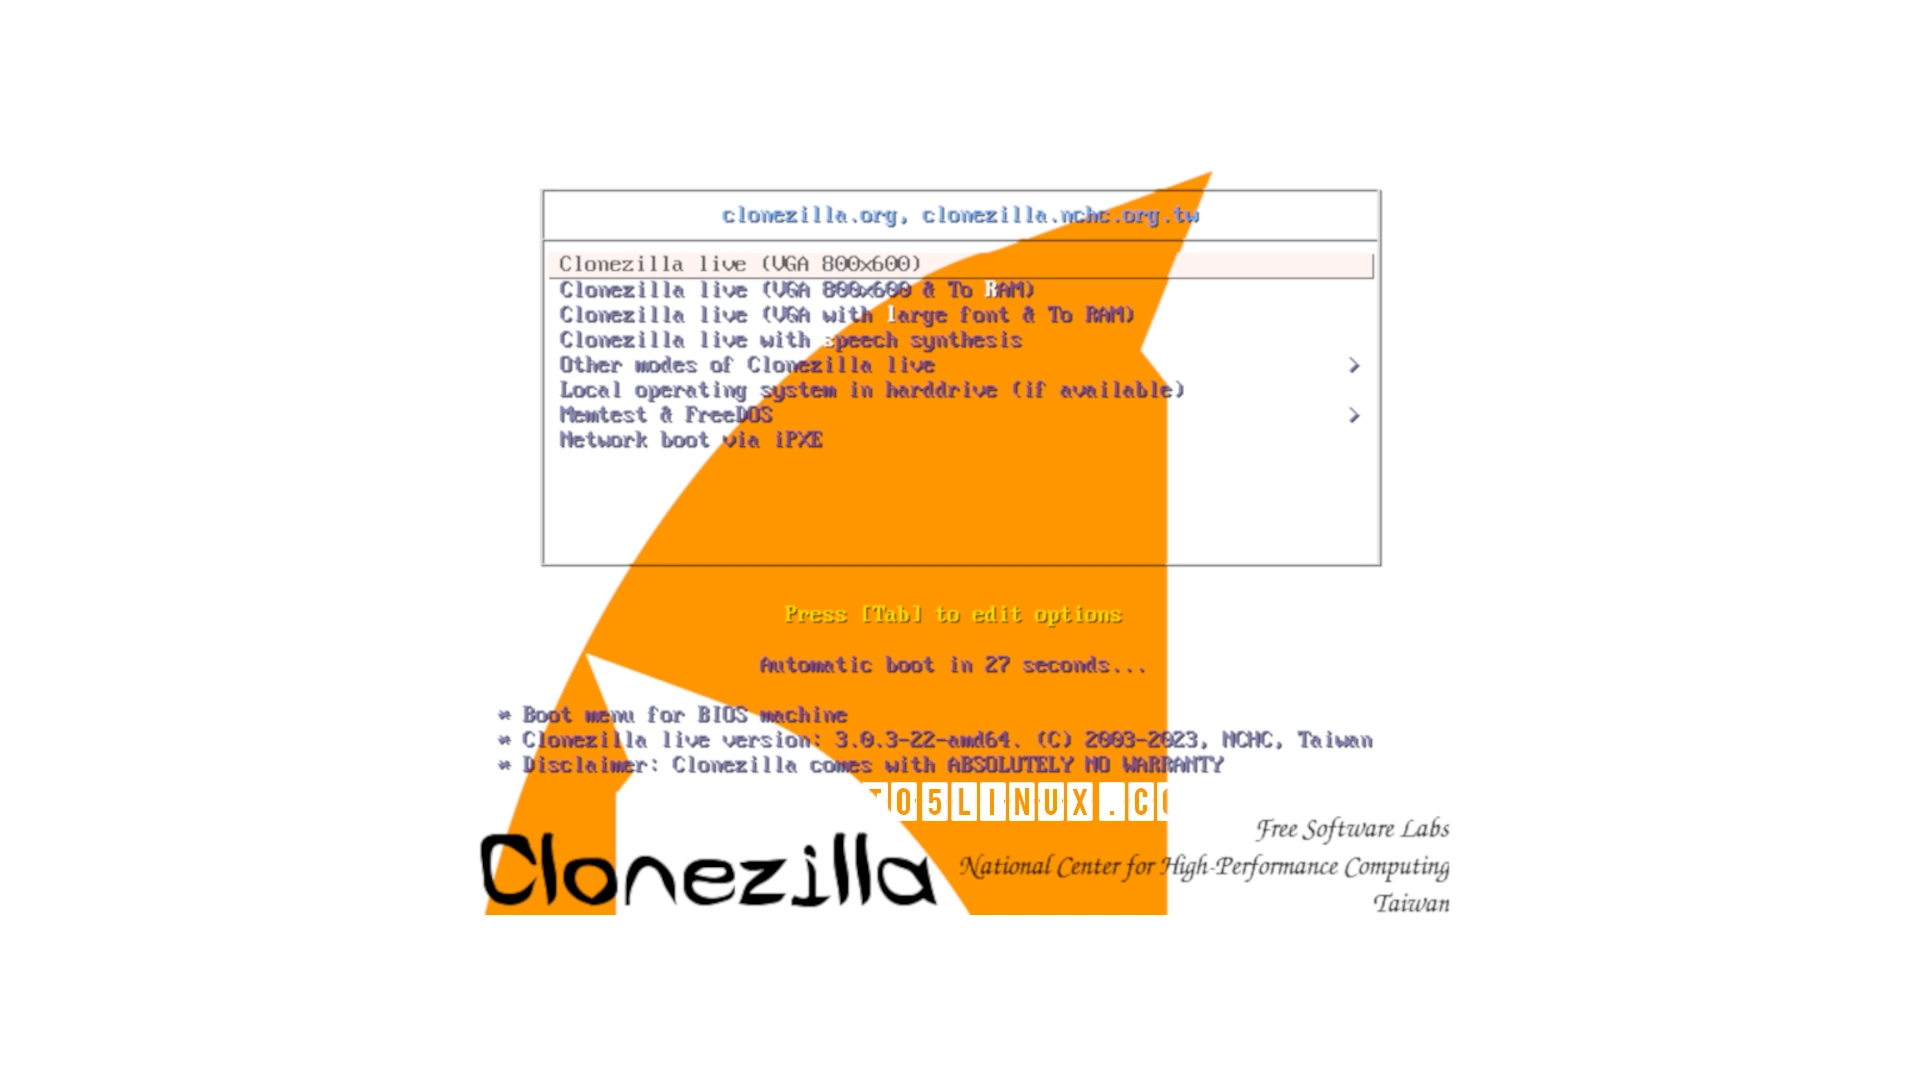 Clonezilla Live 3.0.3 Disk Cloning Tool Adds Support for Multiple LUKS Devices, Linux 6.1 LTS